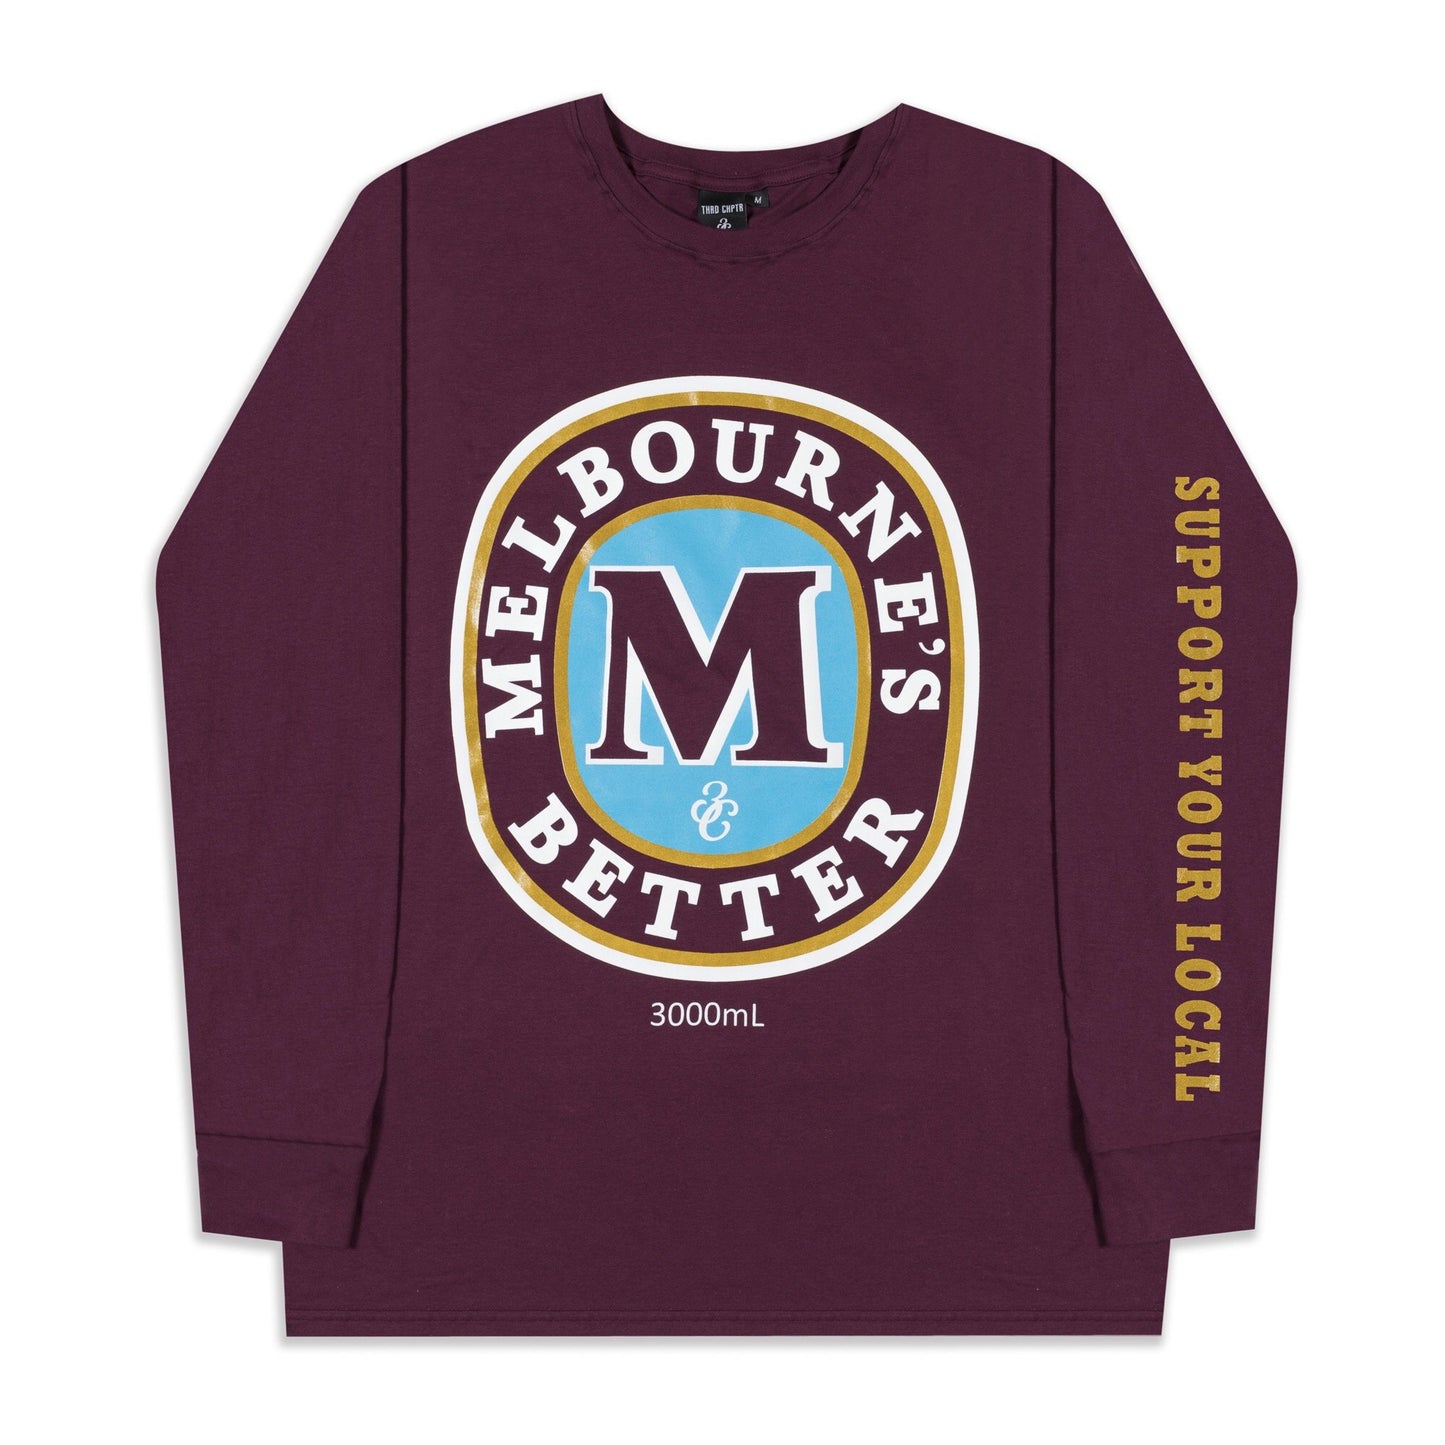 Melbourne’s better Longy Sleeve T-Shirt Maroon